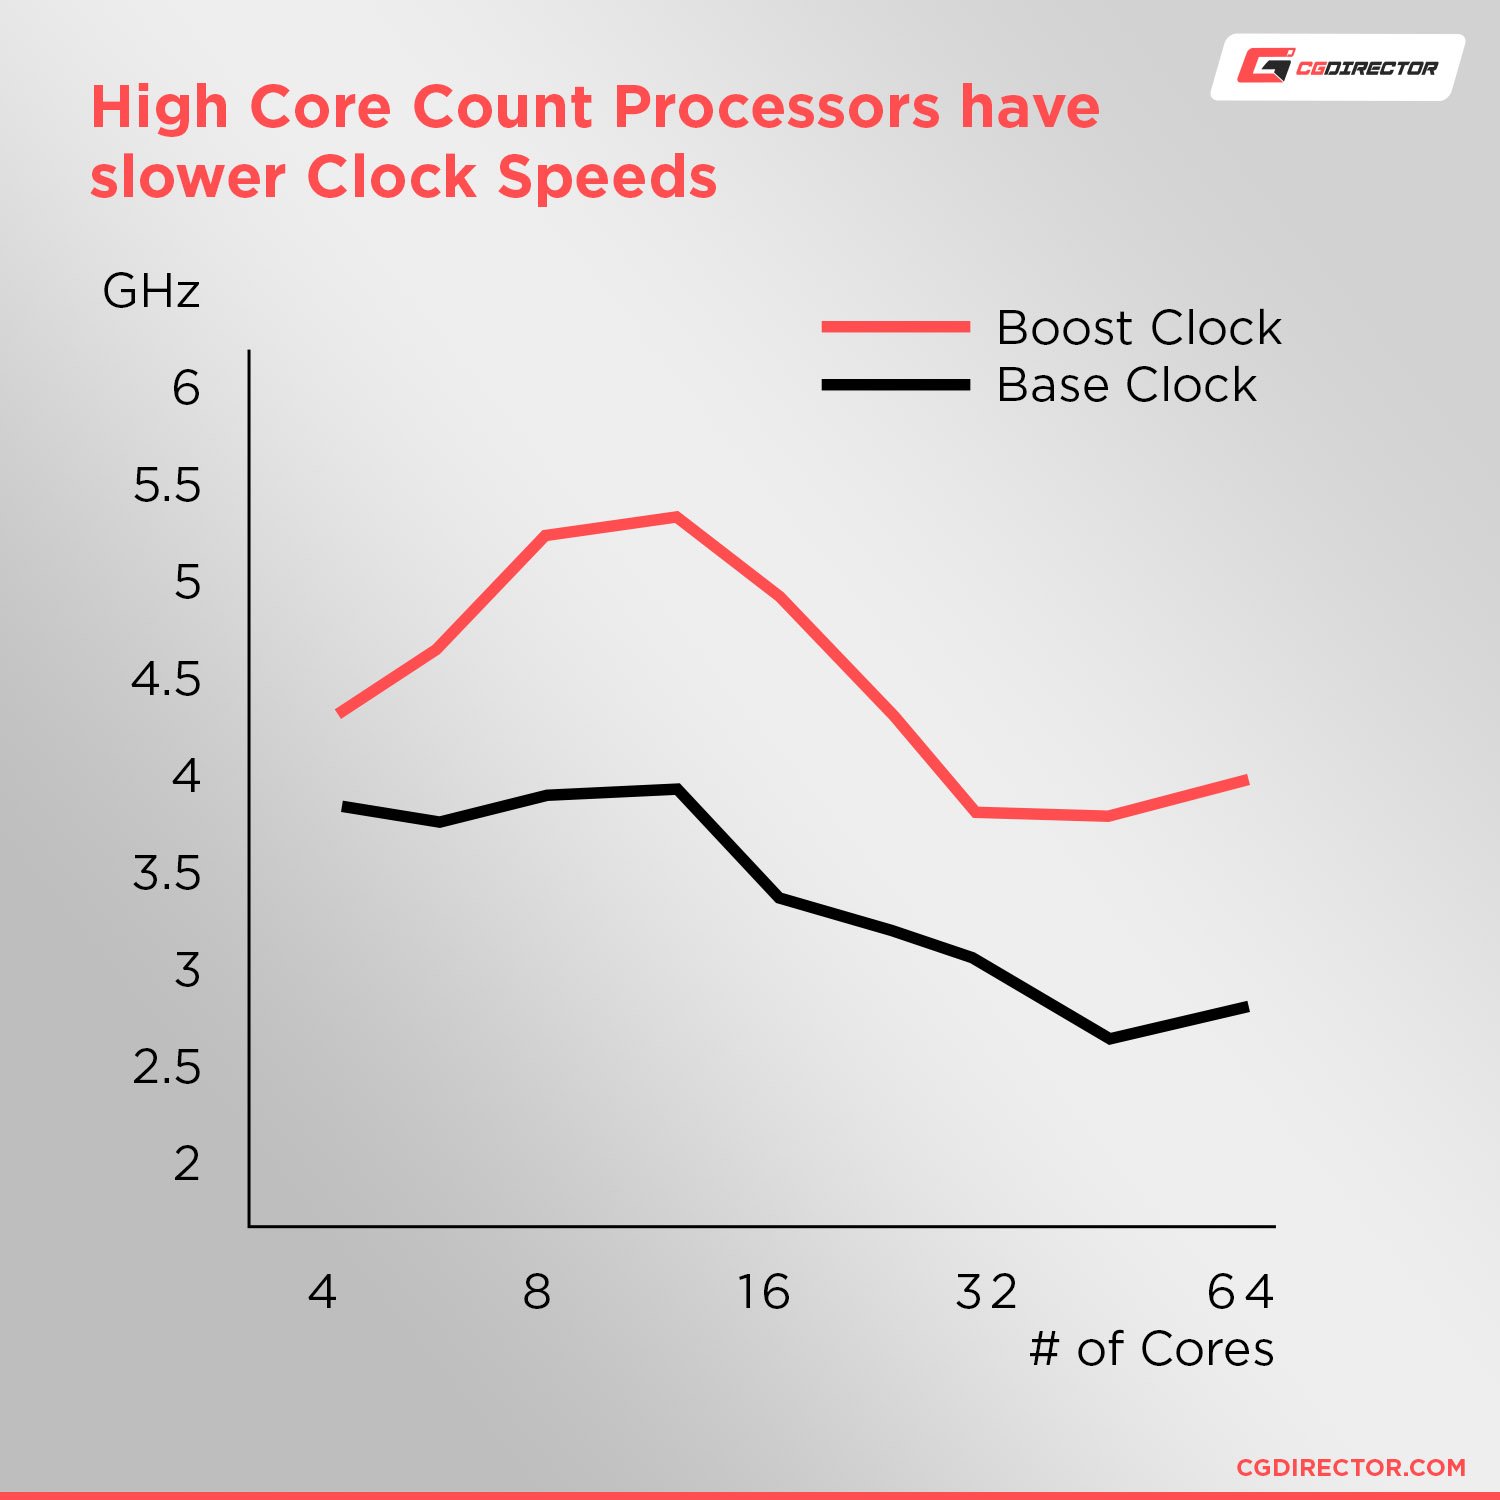 High Core Count Processors have slower clockspeeds